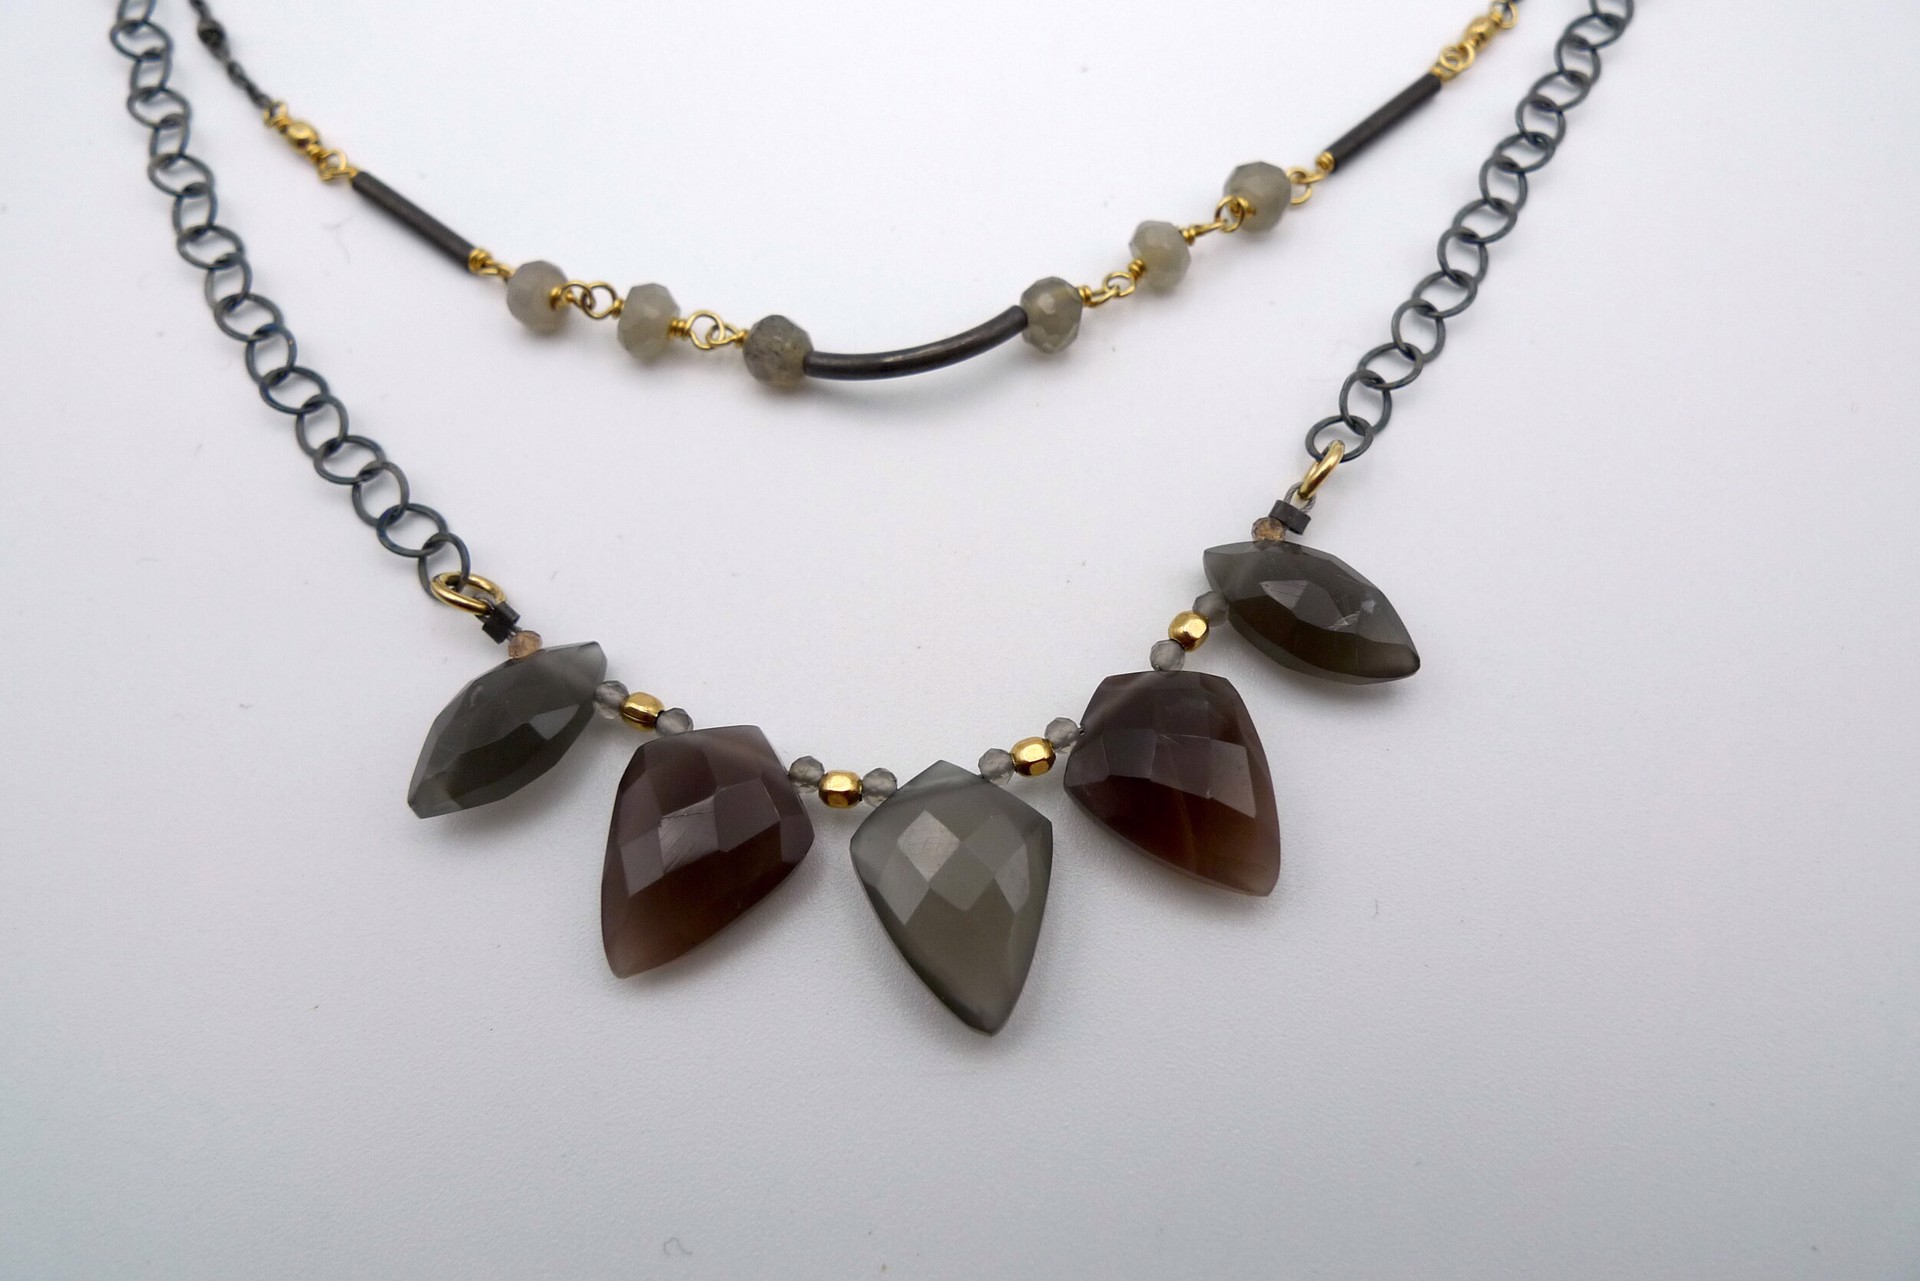 Moonstone Necklace by Alena Fisse-Karr